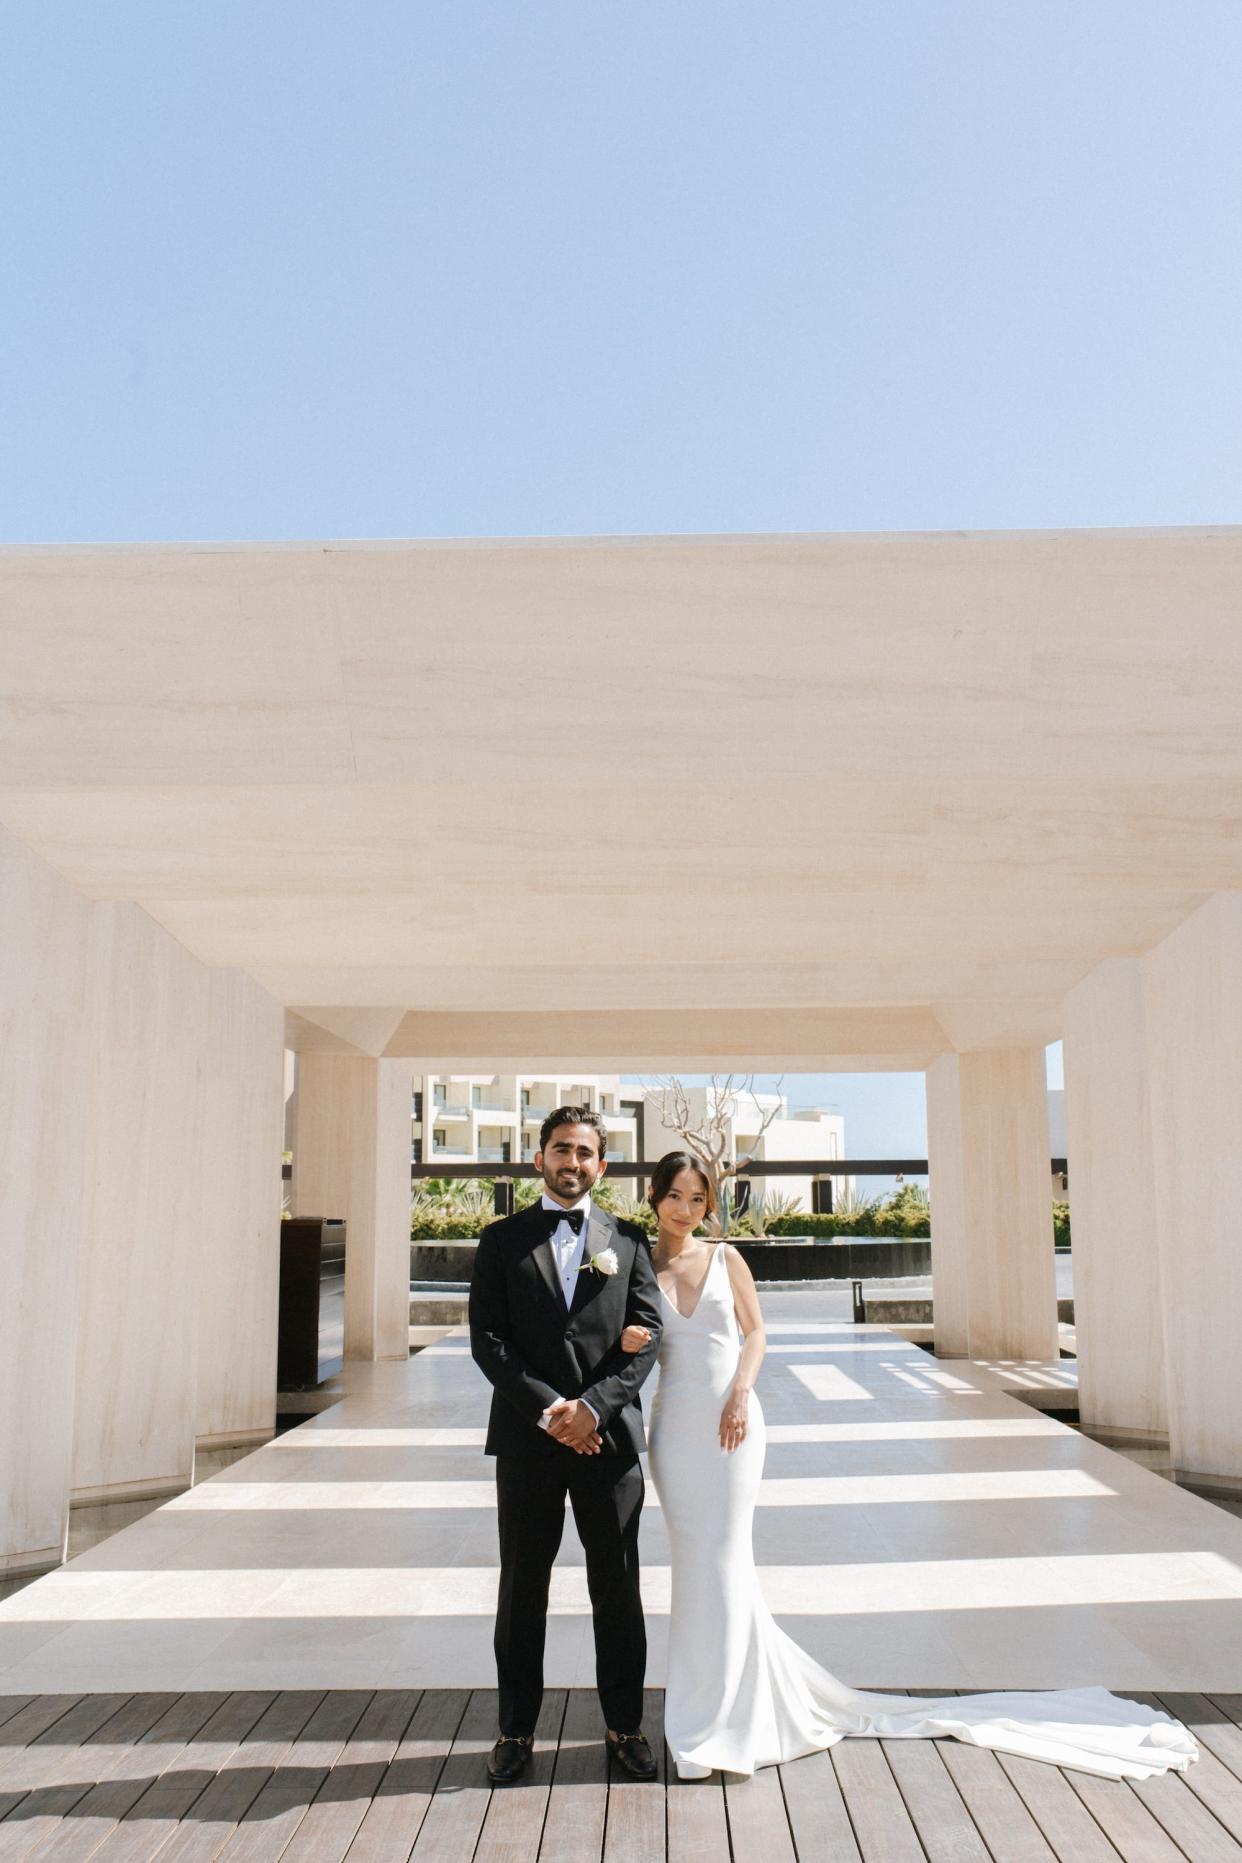 A couple poses in their wedding attire in front of stone arches.